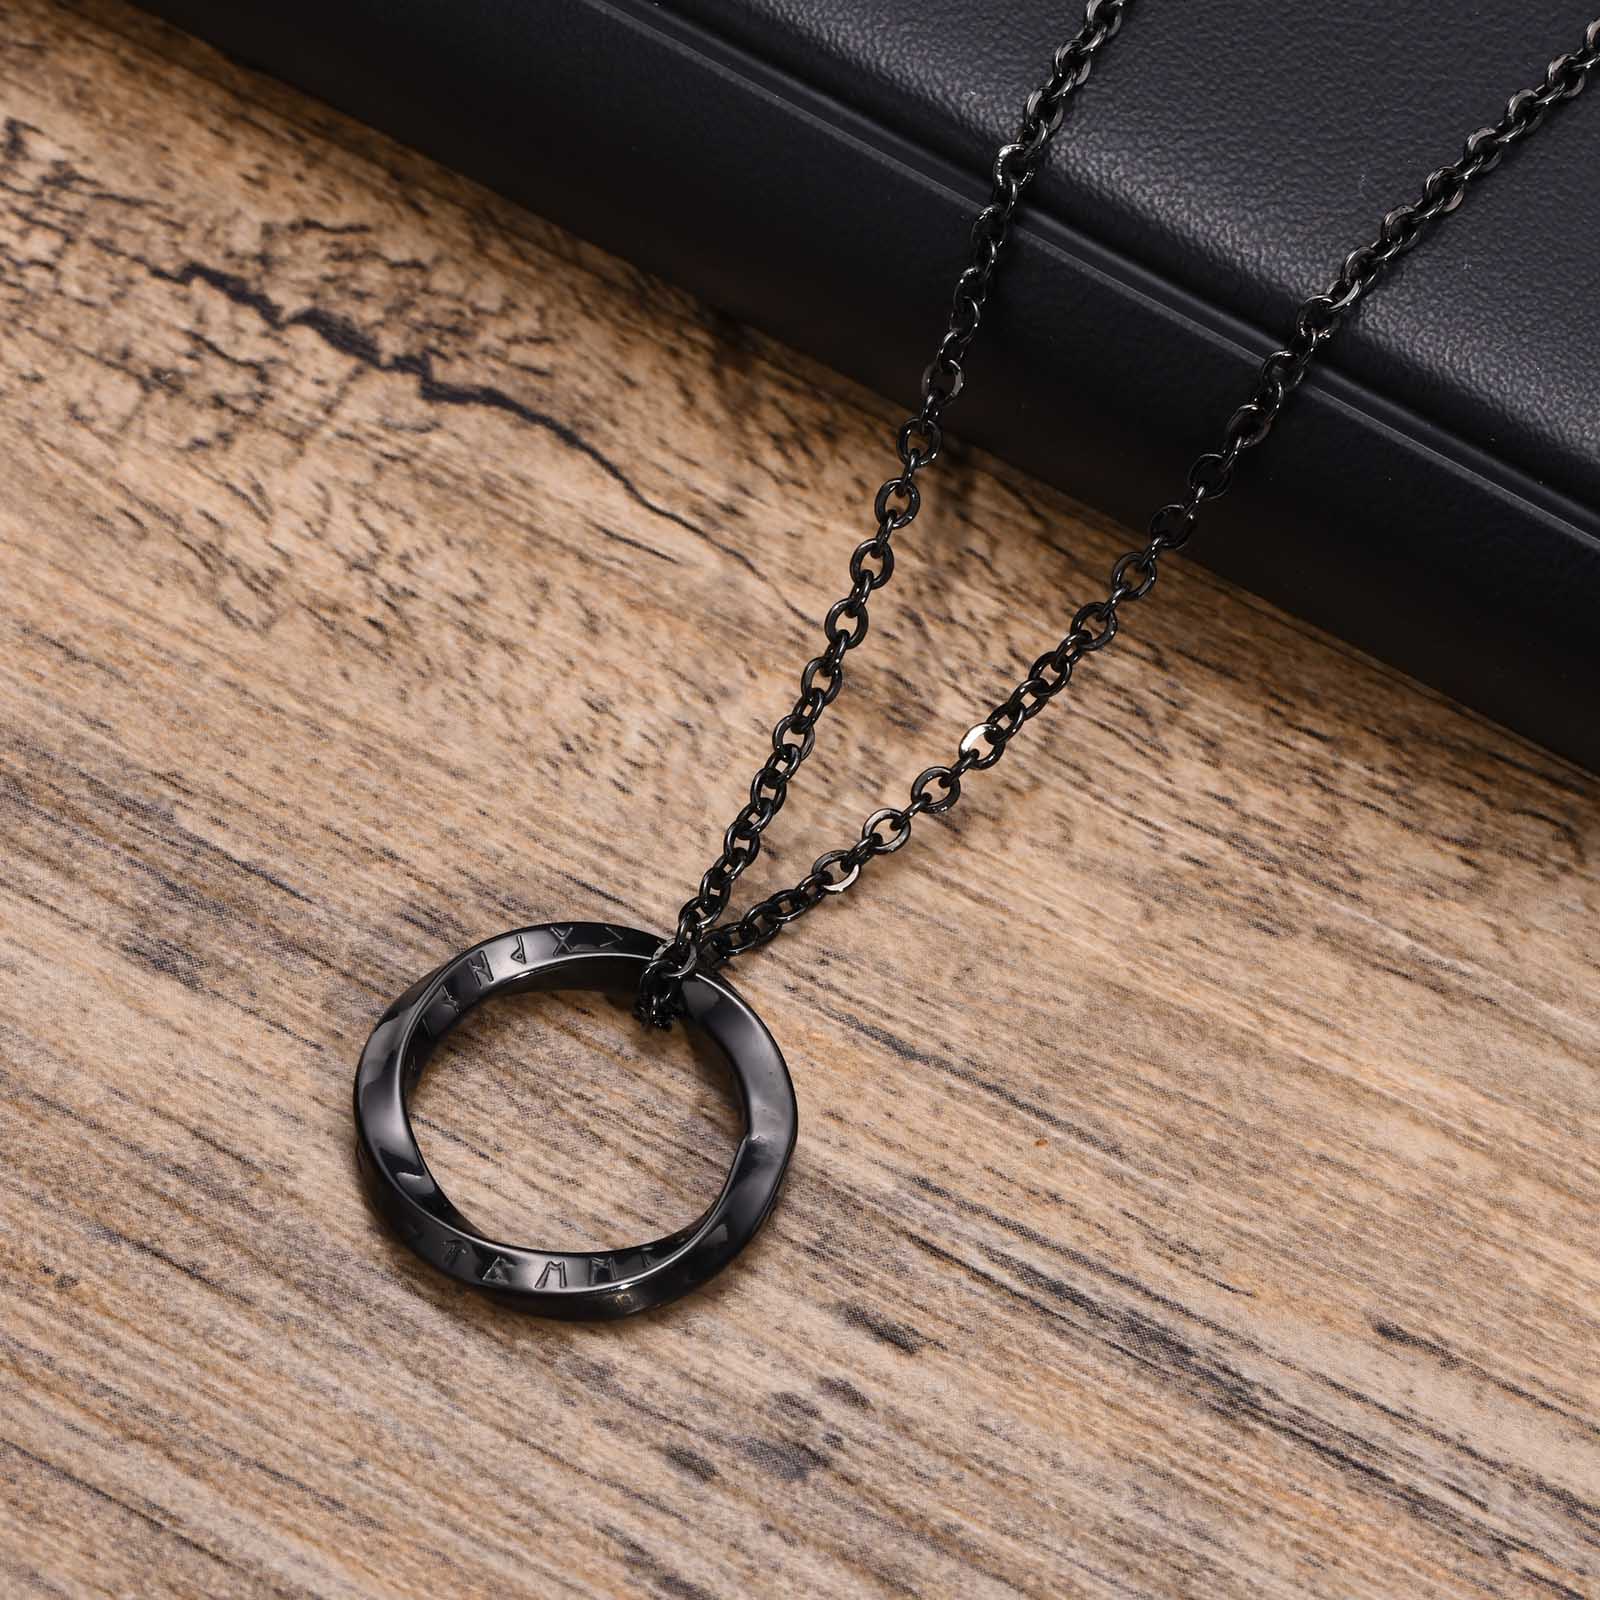 Men's Metal Stainless Steel Link Chain Vintage Punk Necklace